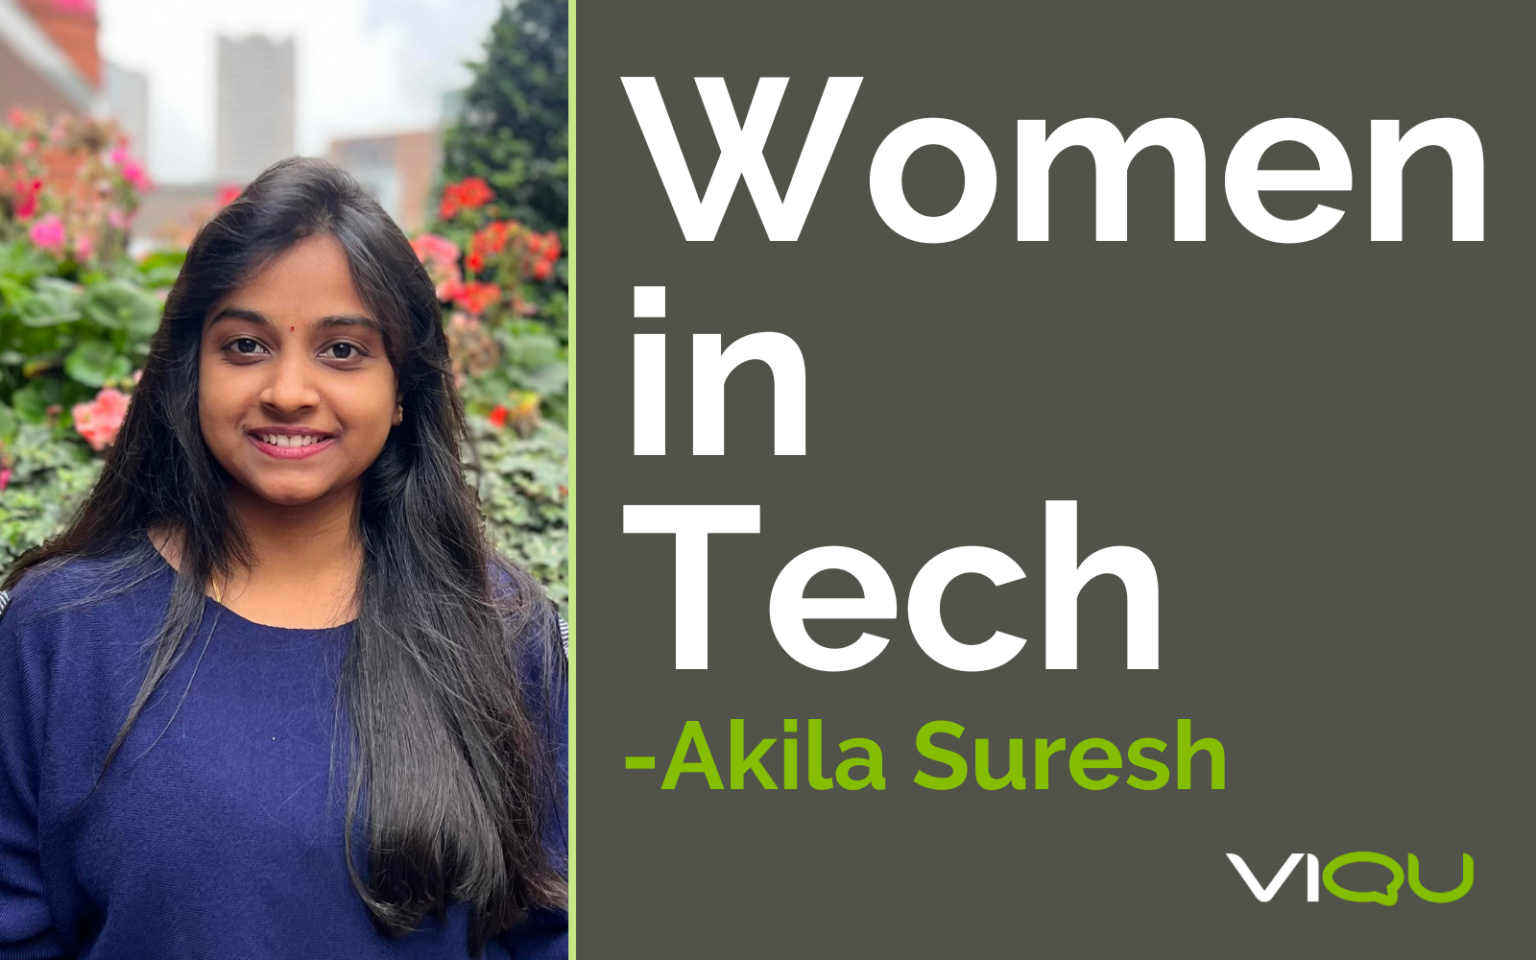 Digital Workplace Analyst, Akila Suresh smiles at the camera, next to the words 'Women in Tech - Akila Suresh'.